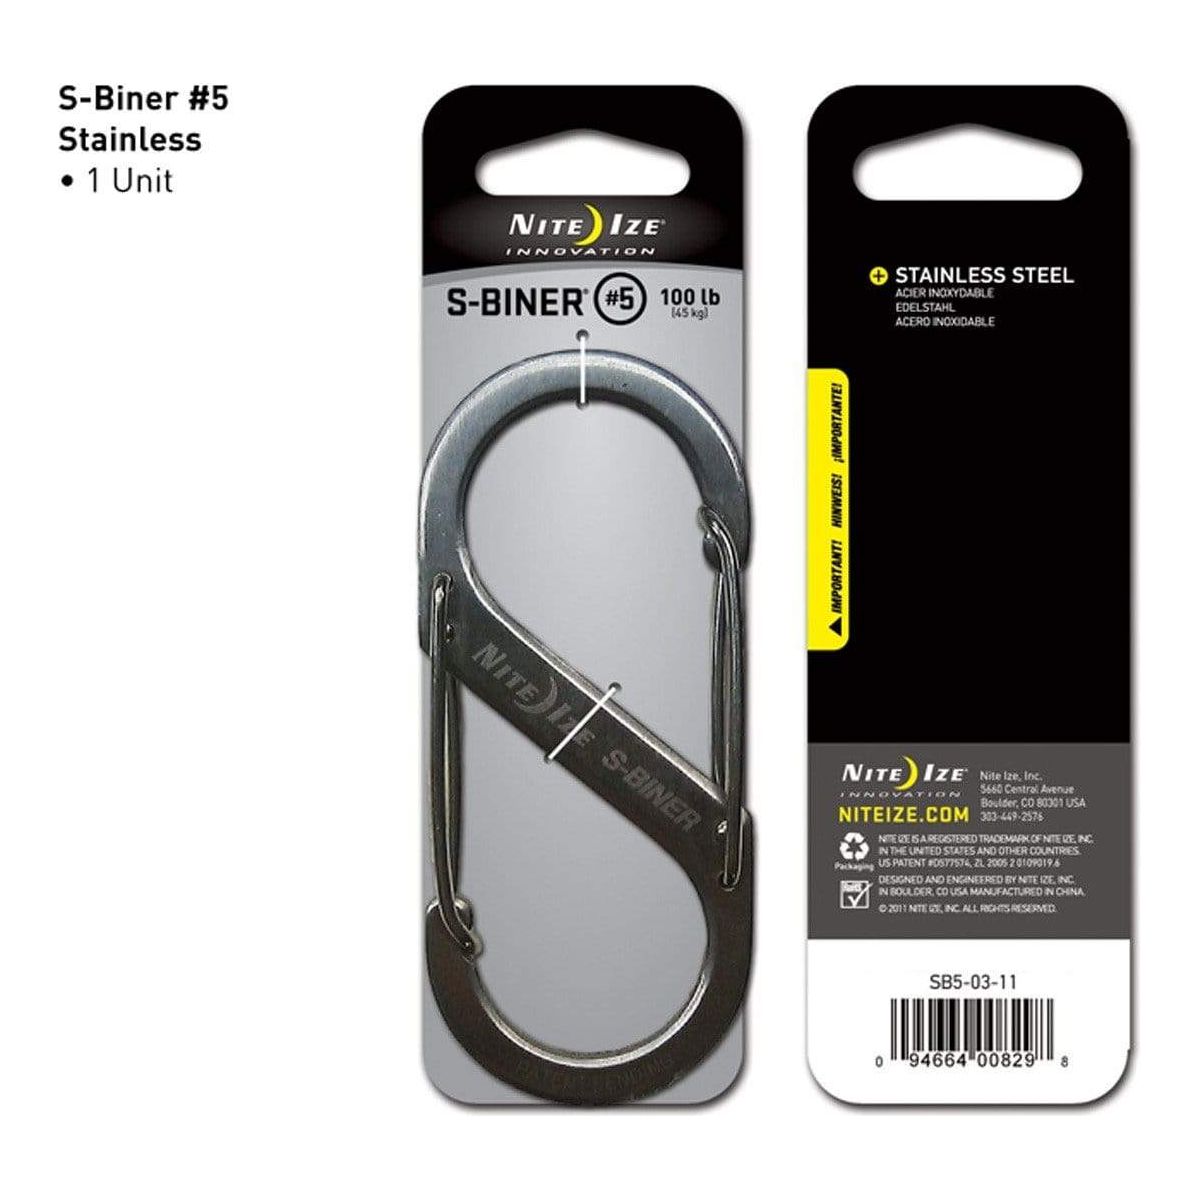 Paramedic Shop Zen Imports Pty Ltd Tools Stainless Steel Nite Ize S-Biner #5 Dual Carabiner Stainless Steel